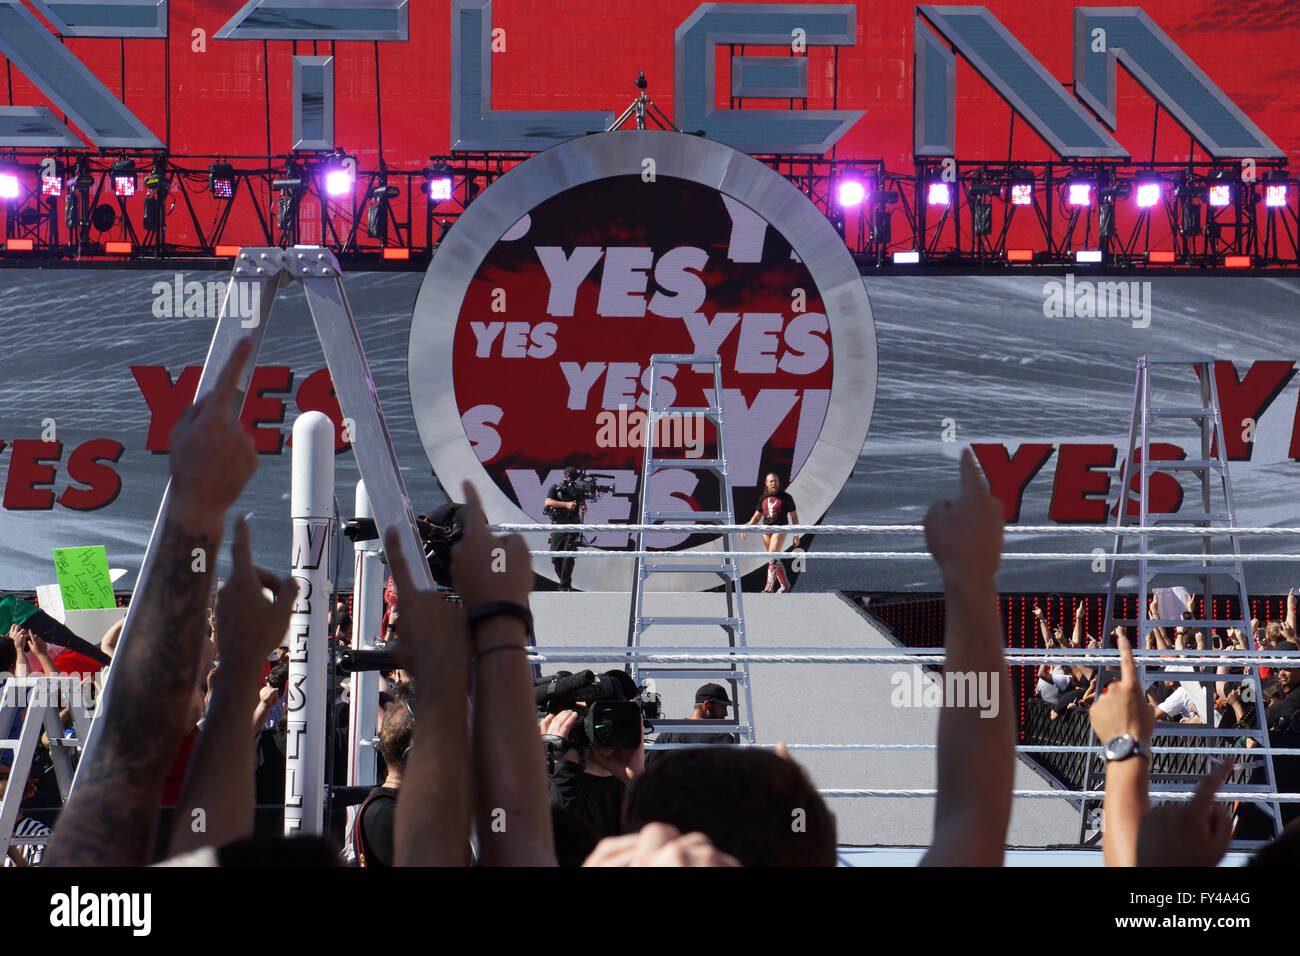 SANTA CLARA - MARCH 29: Wrestling Daniel Bryan enters arena as crowd yes chants for Intercontinental championship ladder match at Wrestlemania 31 at the Levi's Stadium in Santa Clara, California on March 29, 2015. Stock Photo